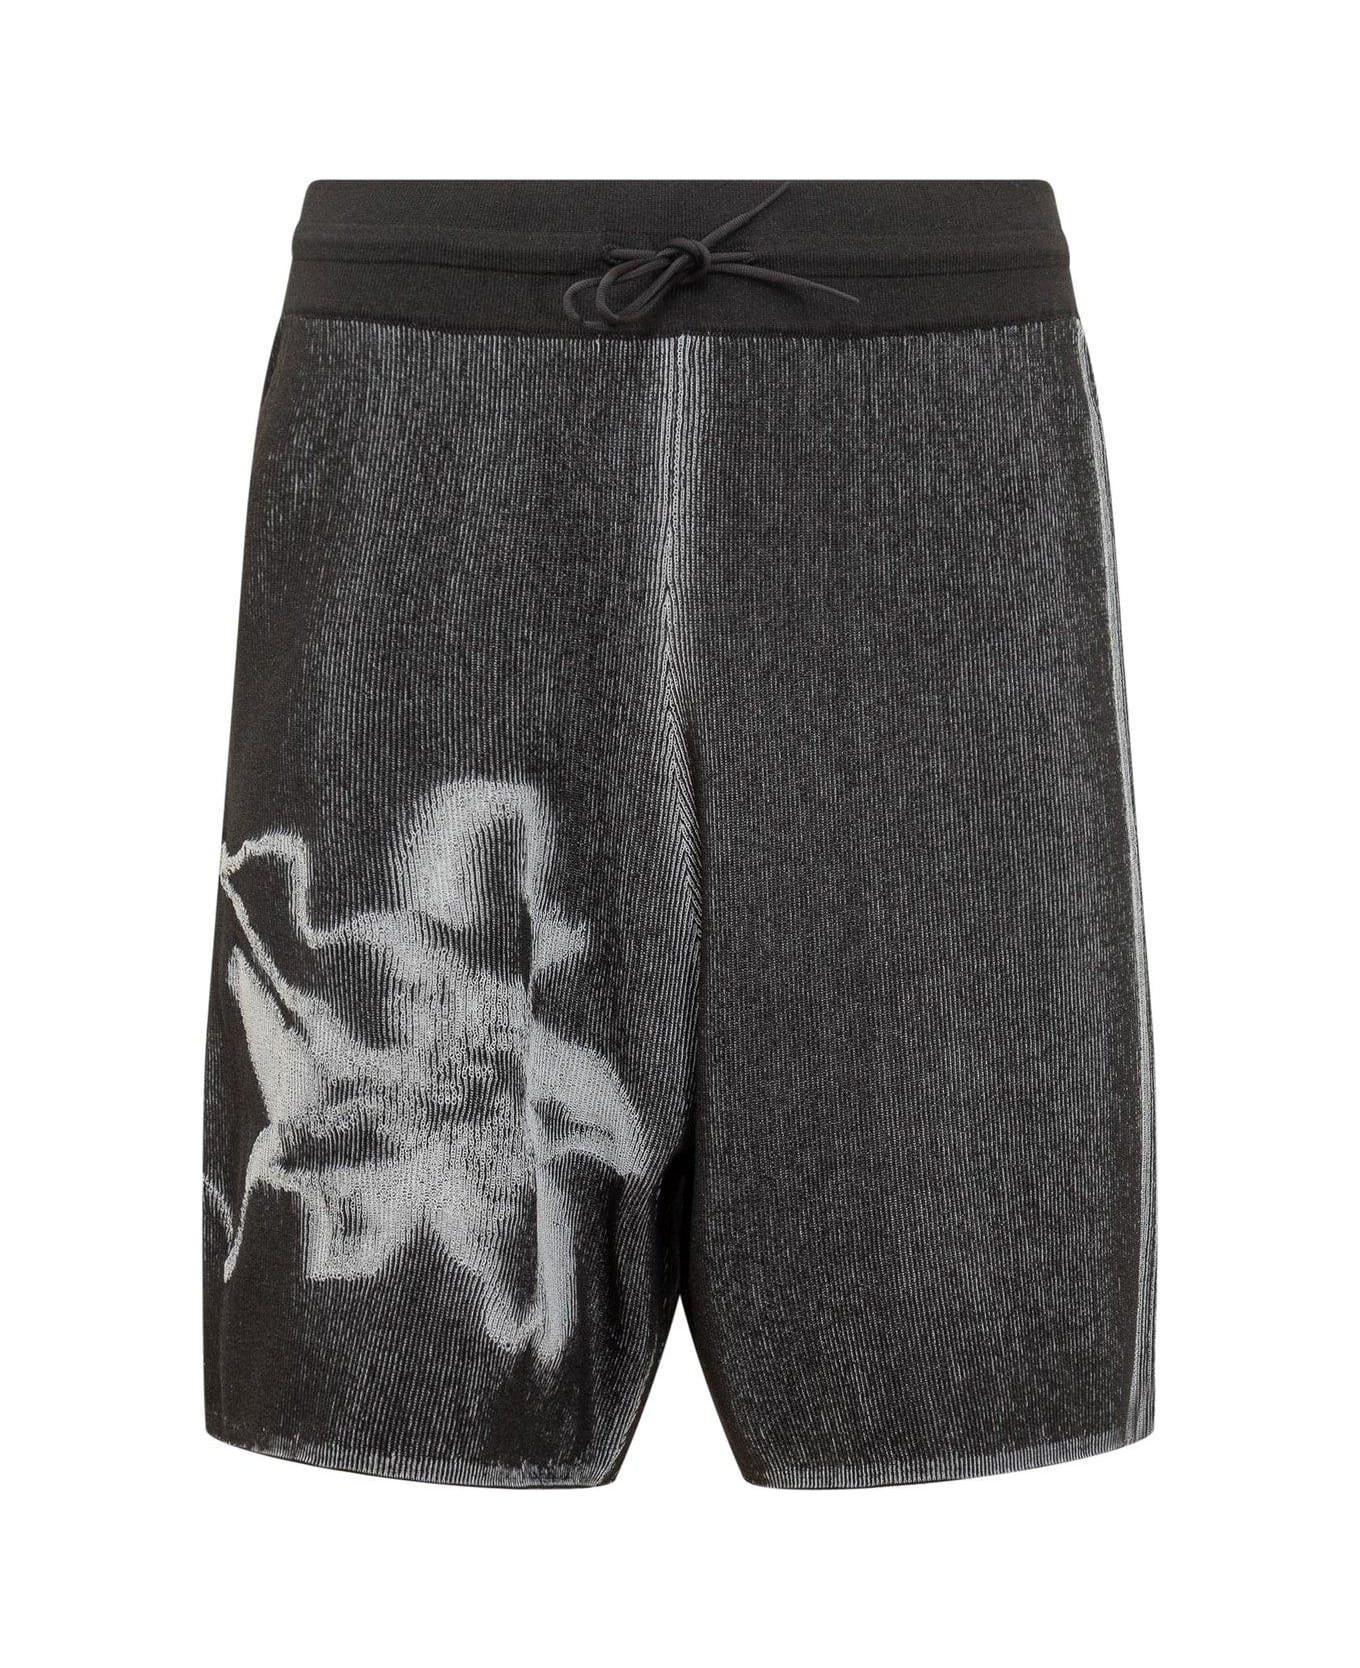 Y-3 Gfx Relaxed Fit Knit Shorts name:468